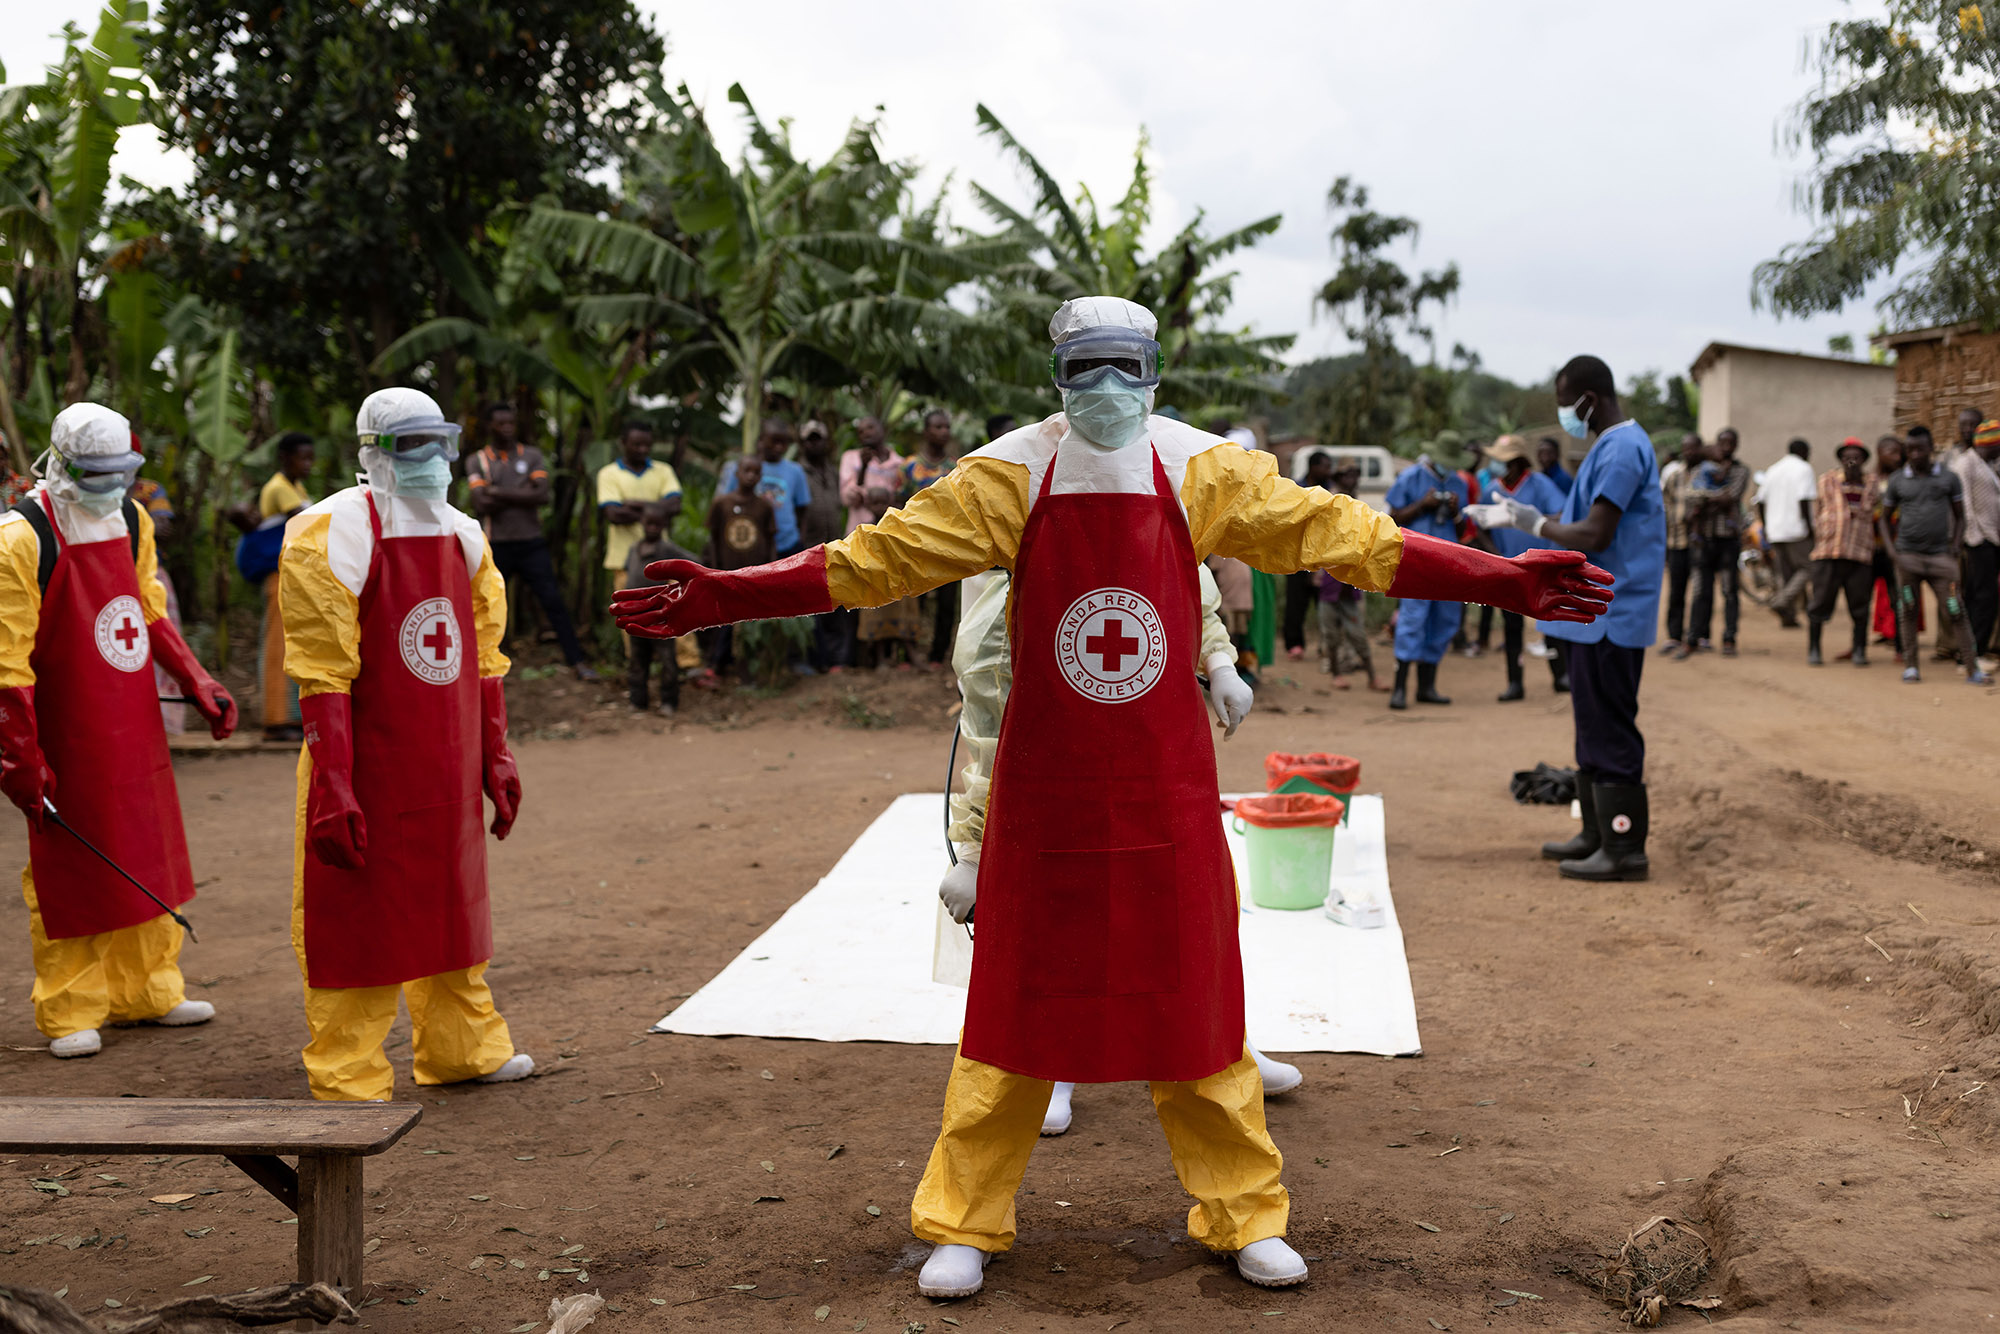 Uganda Lifts Ebola Quarantine After Weeks With No New Cases (bloomberg.com)